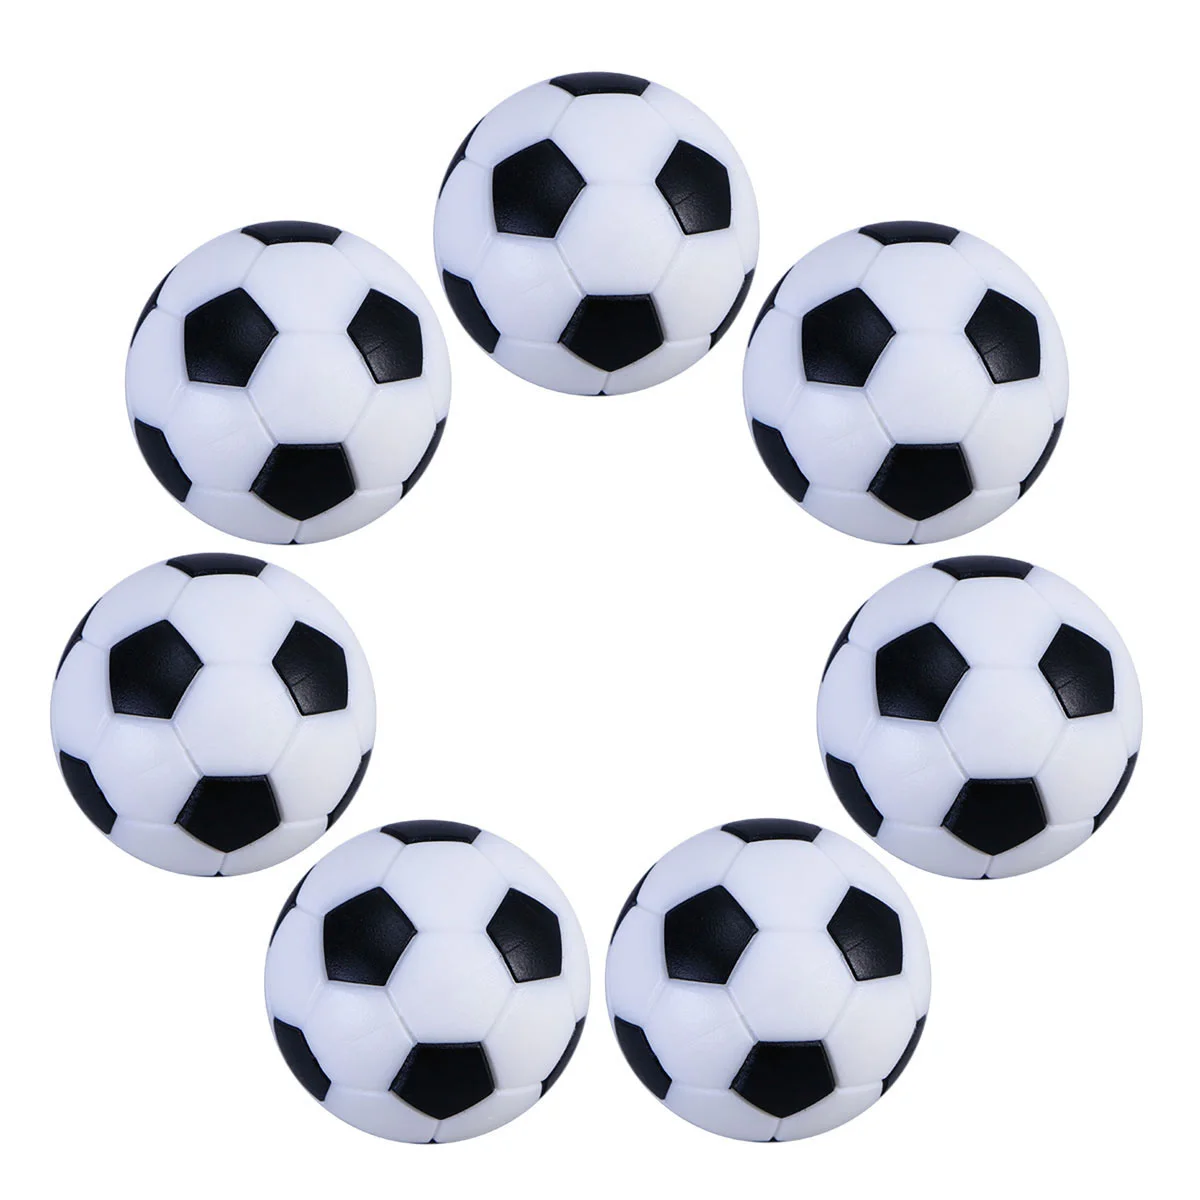 

Foosball Soccer Tablemini Football Replacement Game Tabletopblack White Official Foosballsparty Accessory Accessories